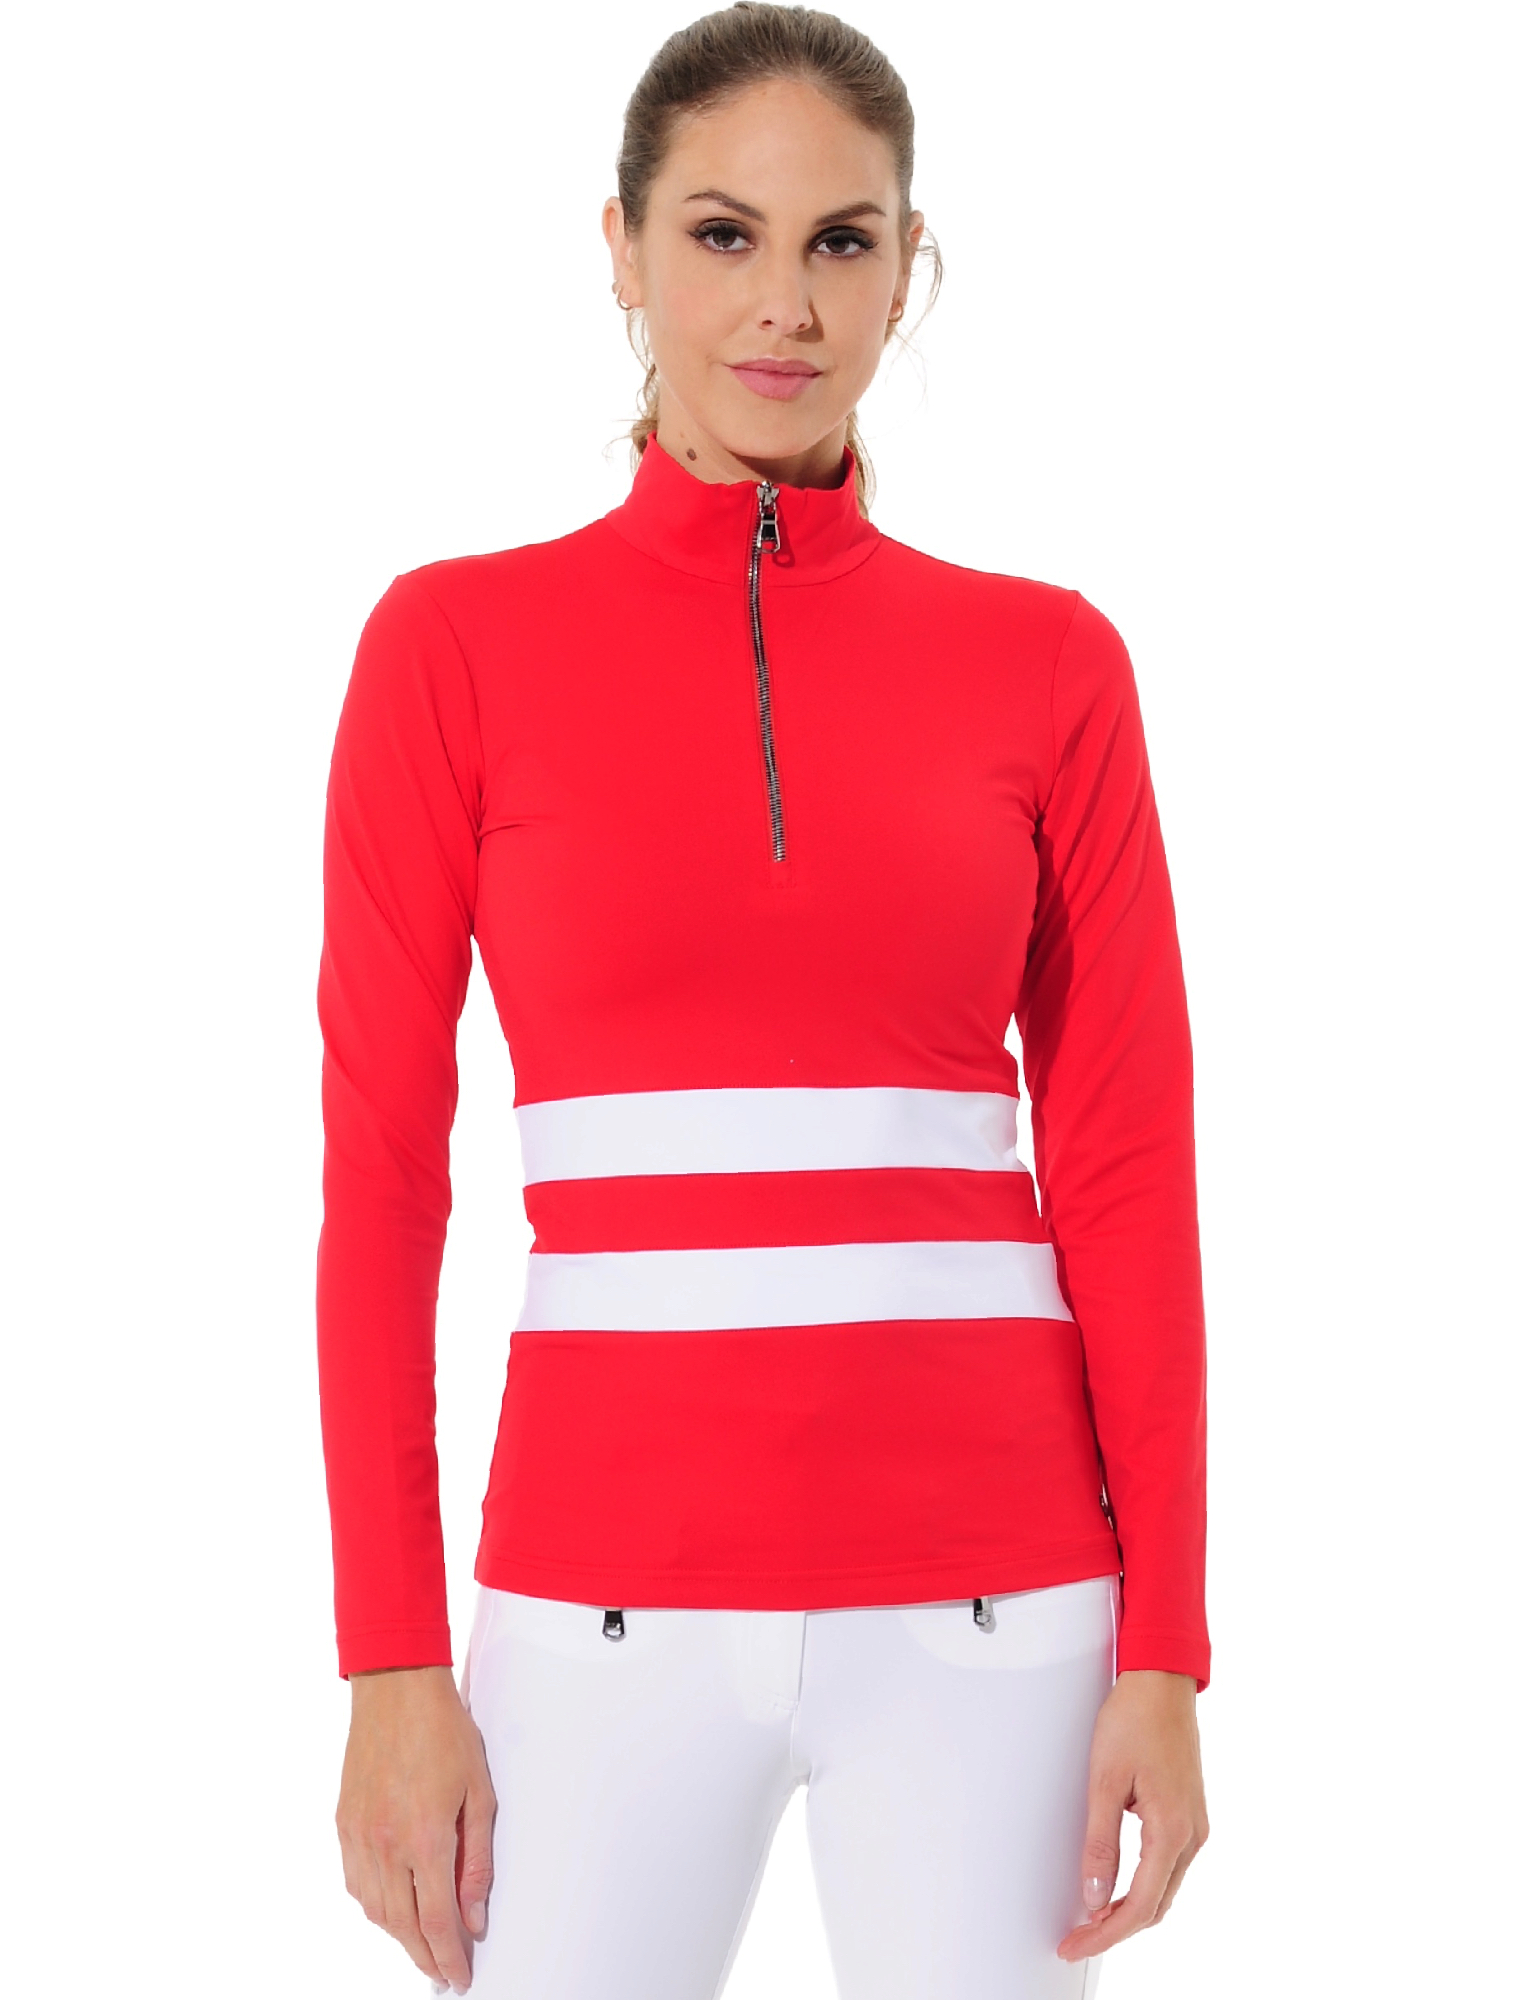 Jersey zip golf polo shirt red/white 